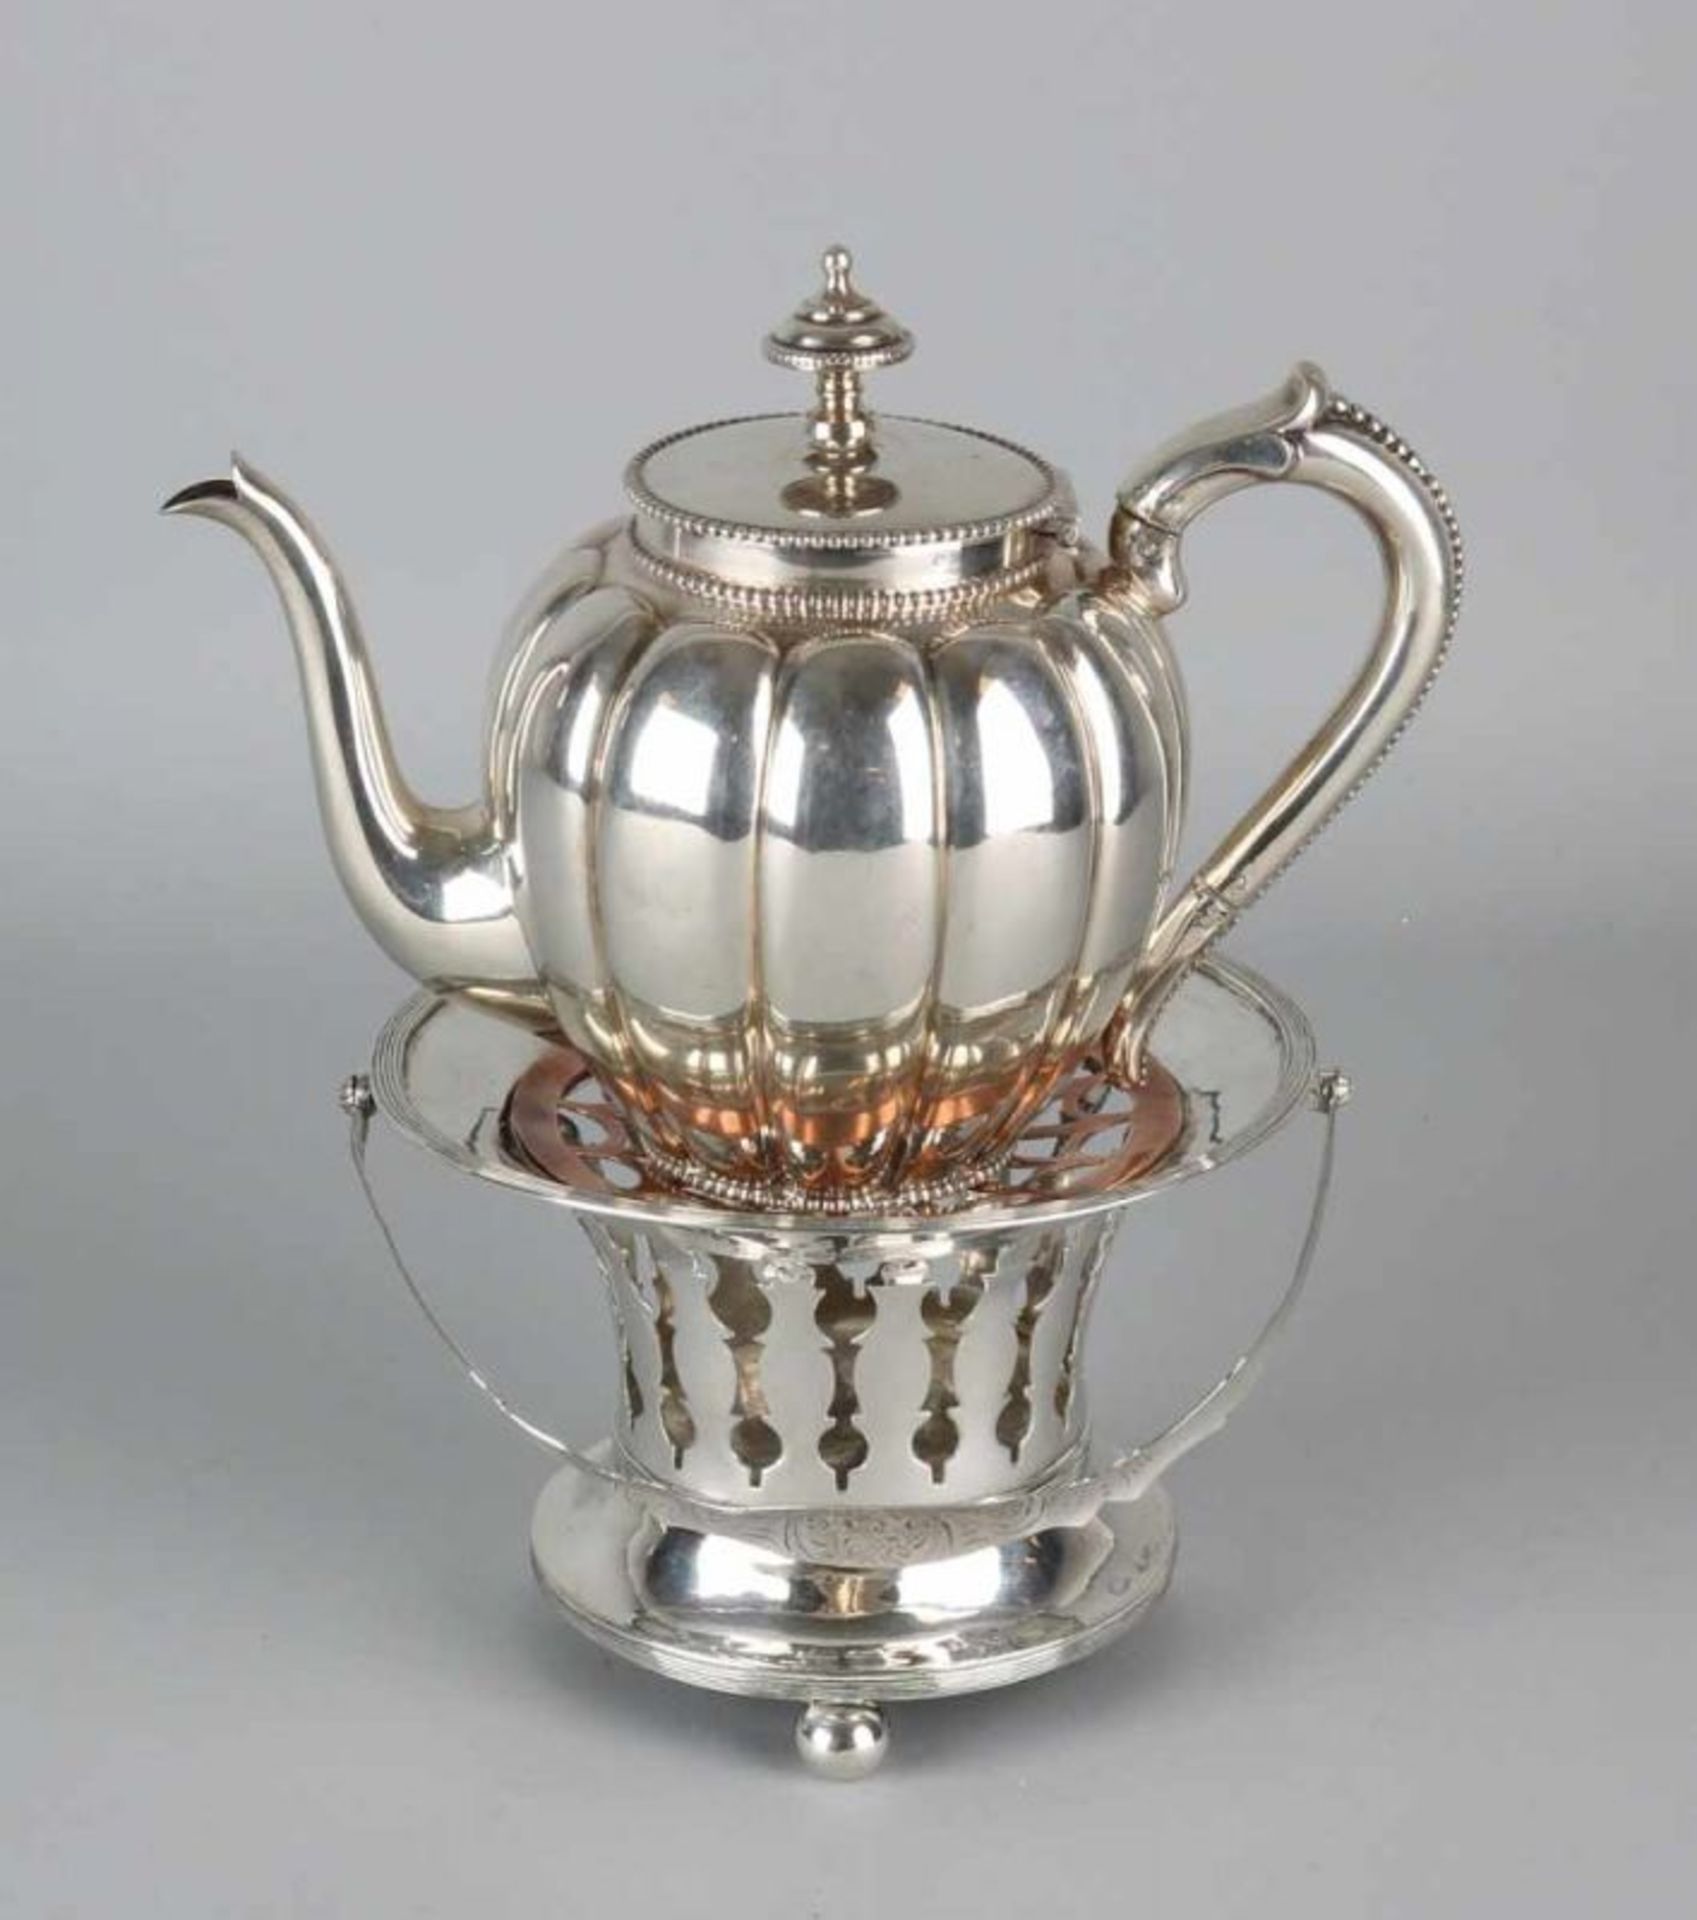 Silver stove and kettle, 833/000, sphere kettle with lobed pattern with pearl edge, MT .: JM Van